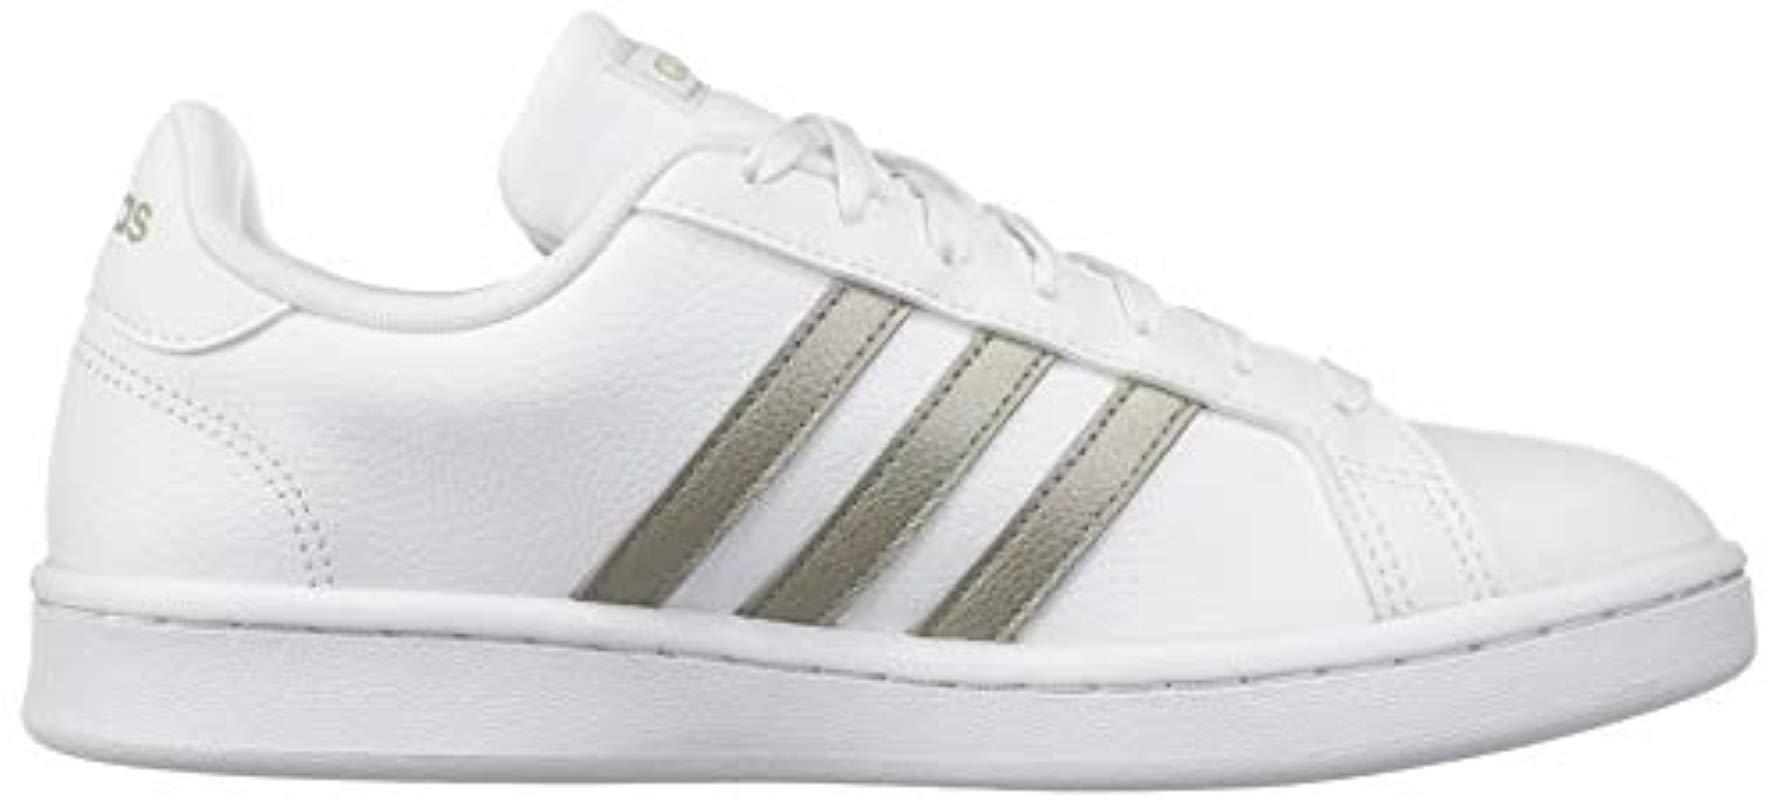 adidas Leather Grand Court Shoes in Cloud White / Platinum Metallic (White)  - Lyst